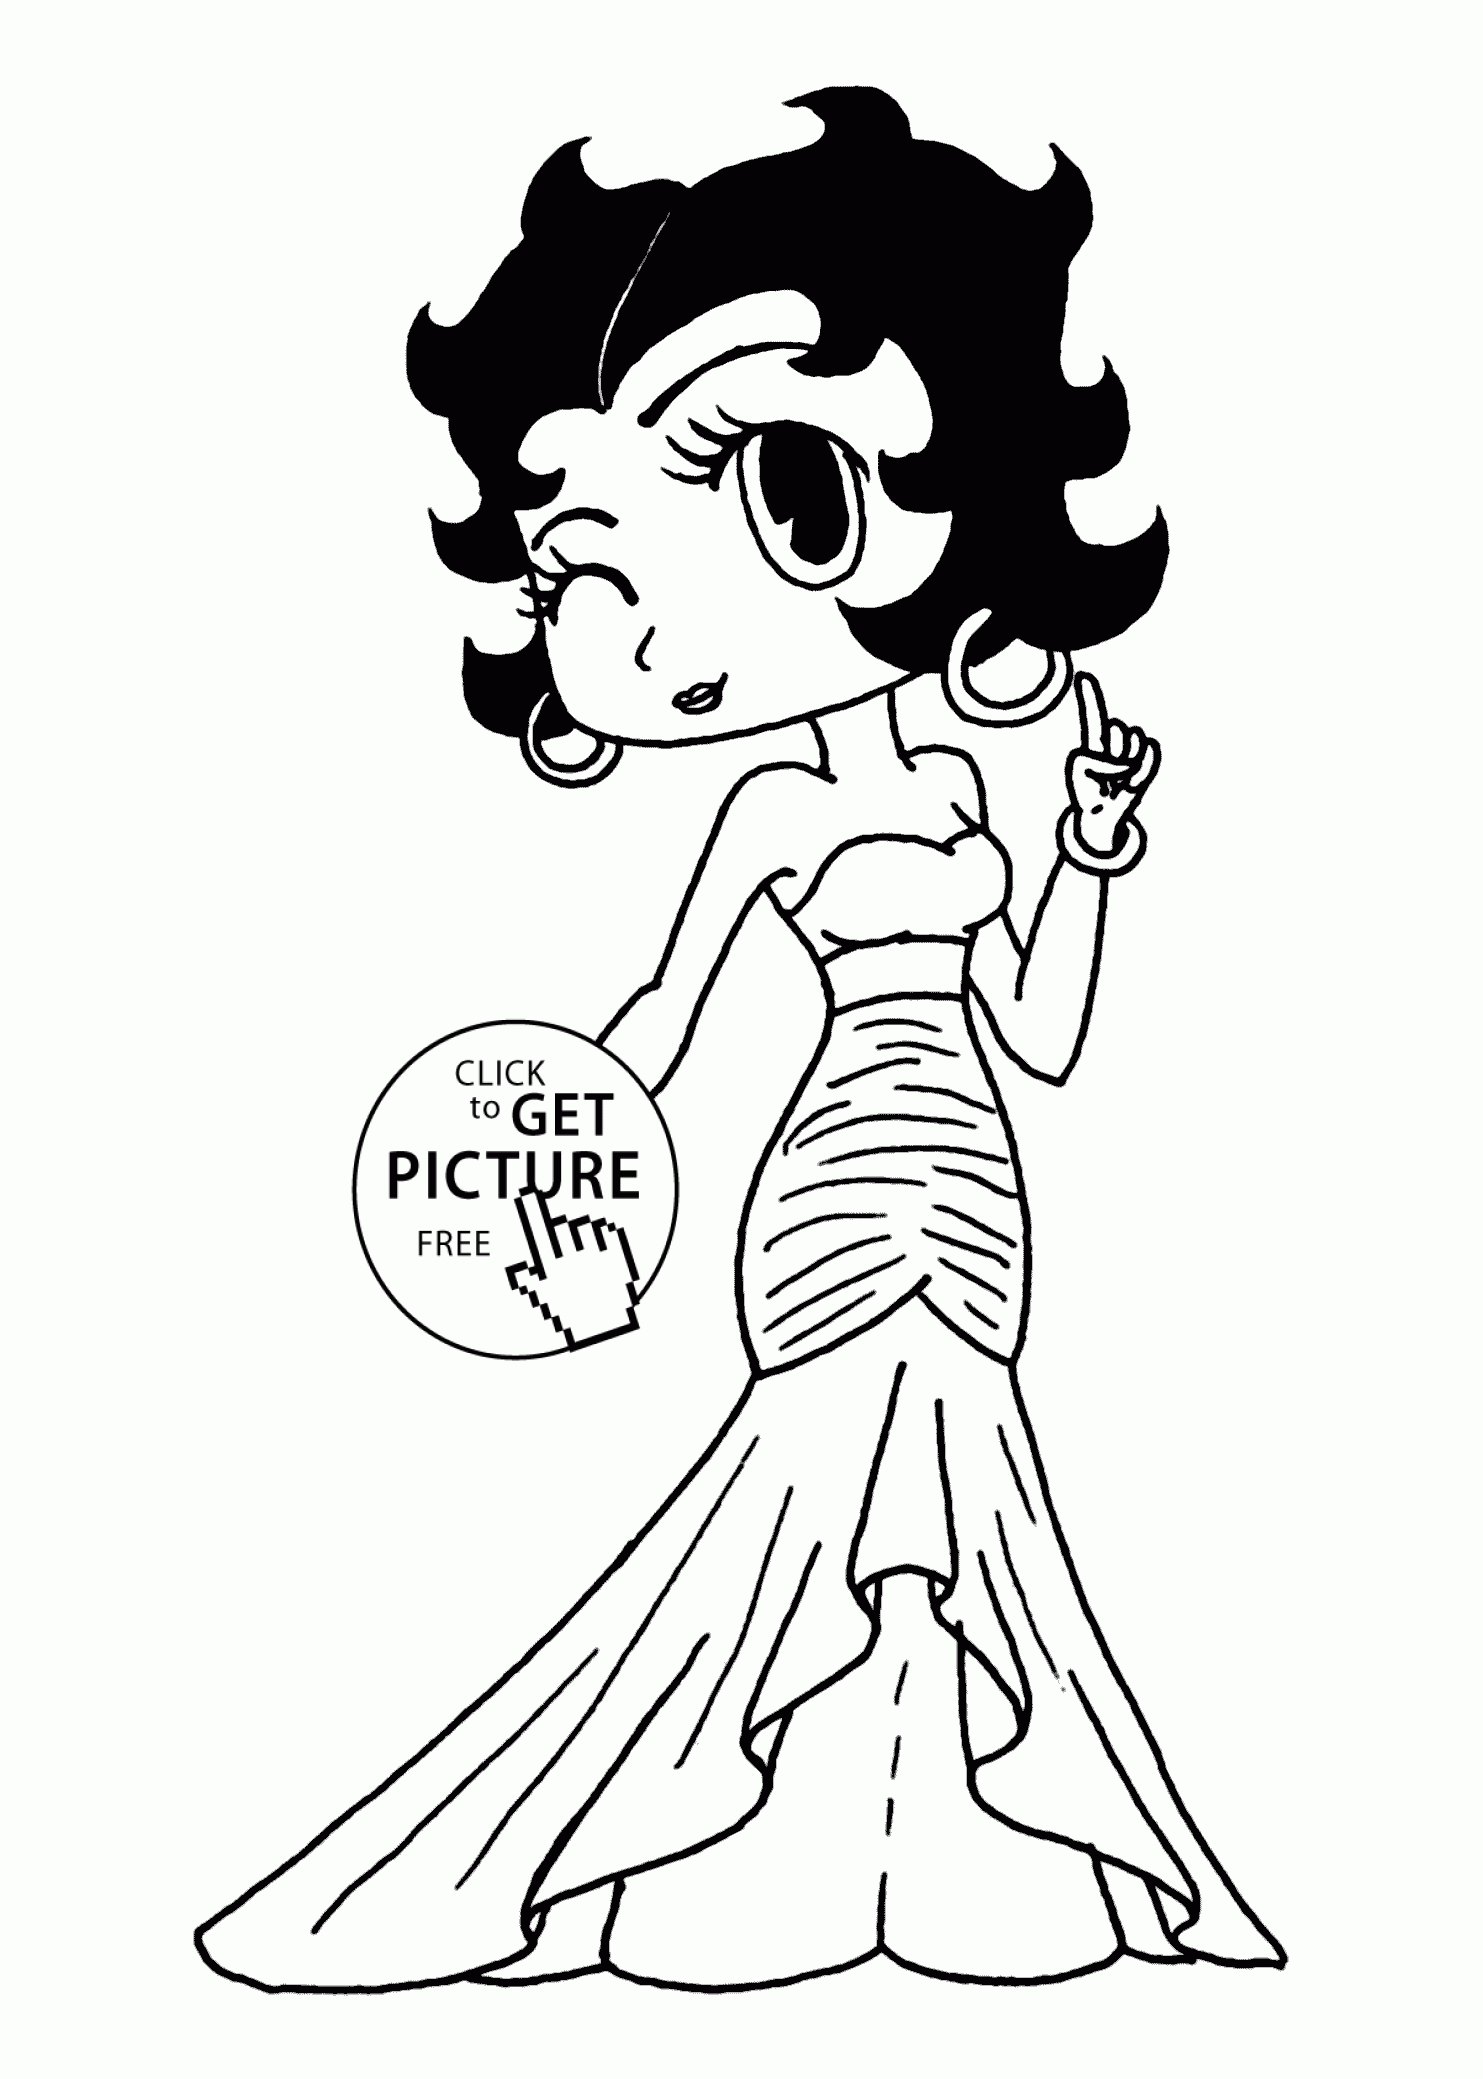 Betty Boop Coloring Pages For Kids, Printable Free - Free Printable Betty Boop